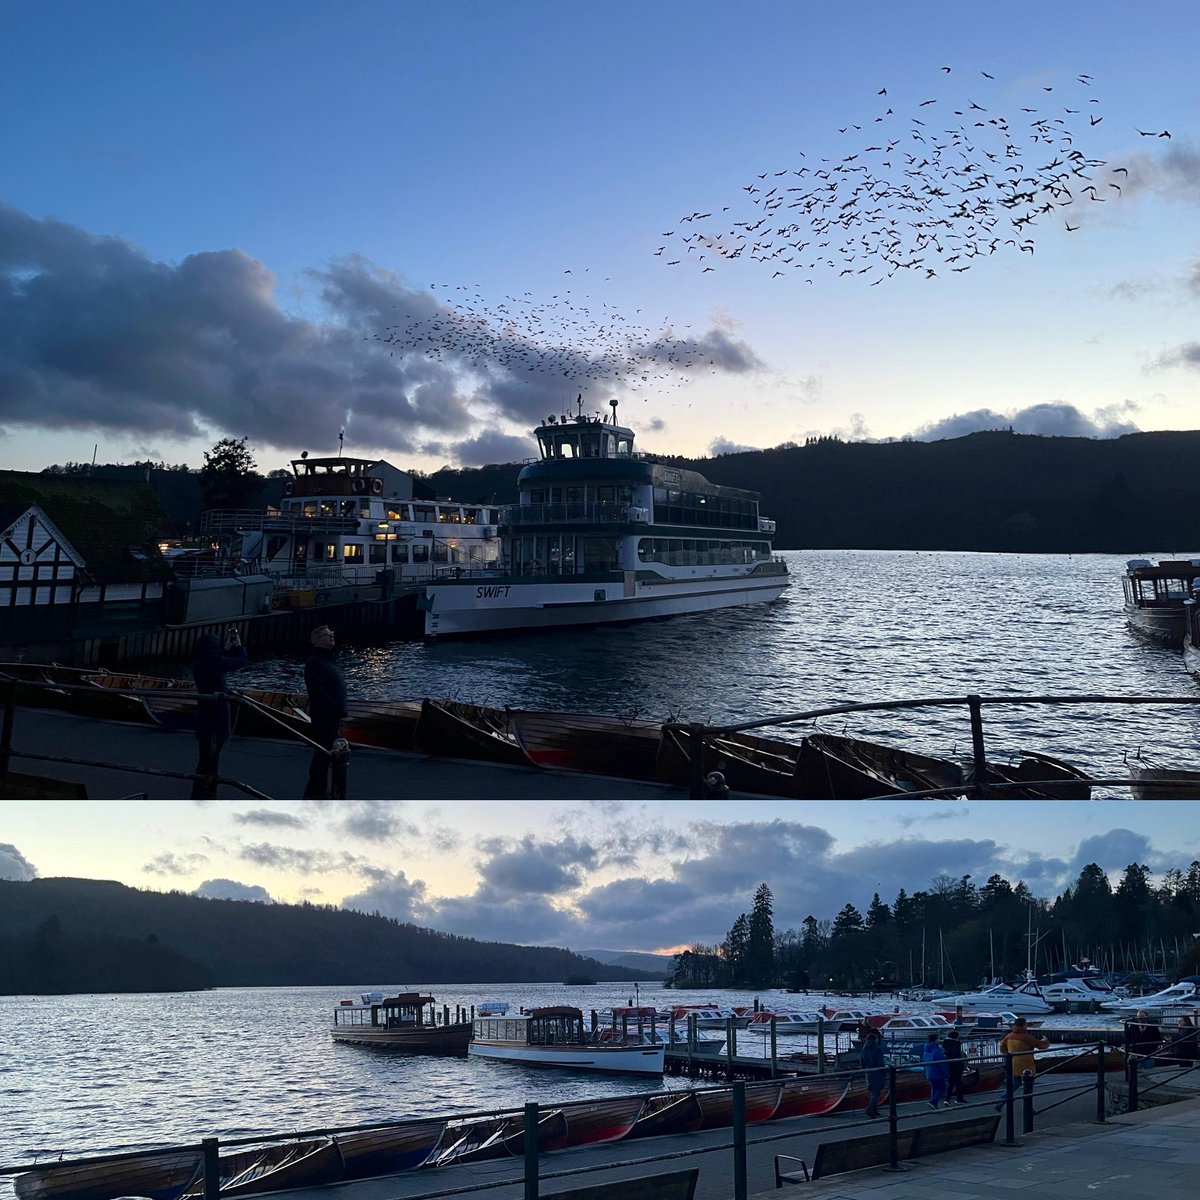 What a lovely evening after a drizzly day - time to get those steps in x #EveningWalk #Bowness @WindermereLake @LakesCumbria @Windermereboats @Lake_DistrictTG